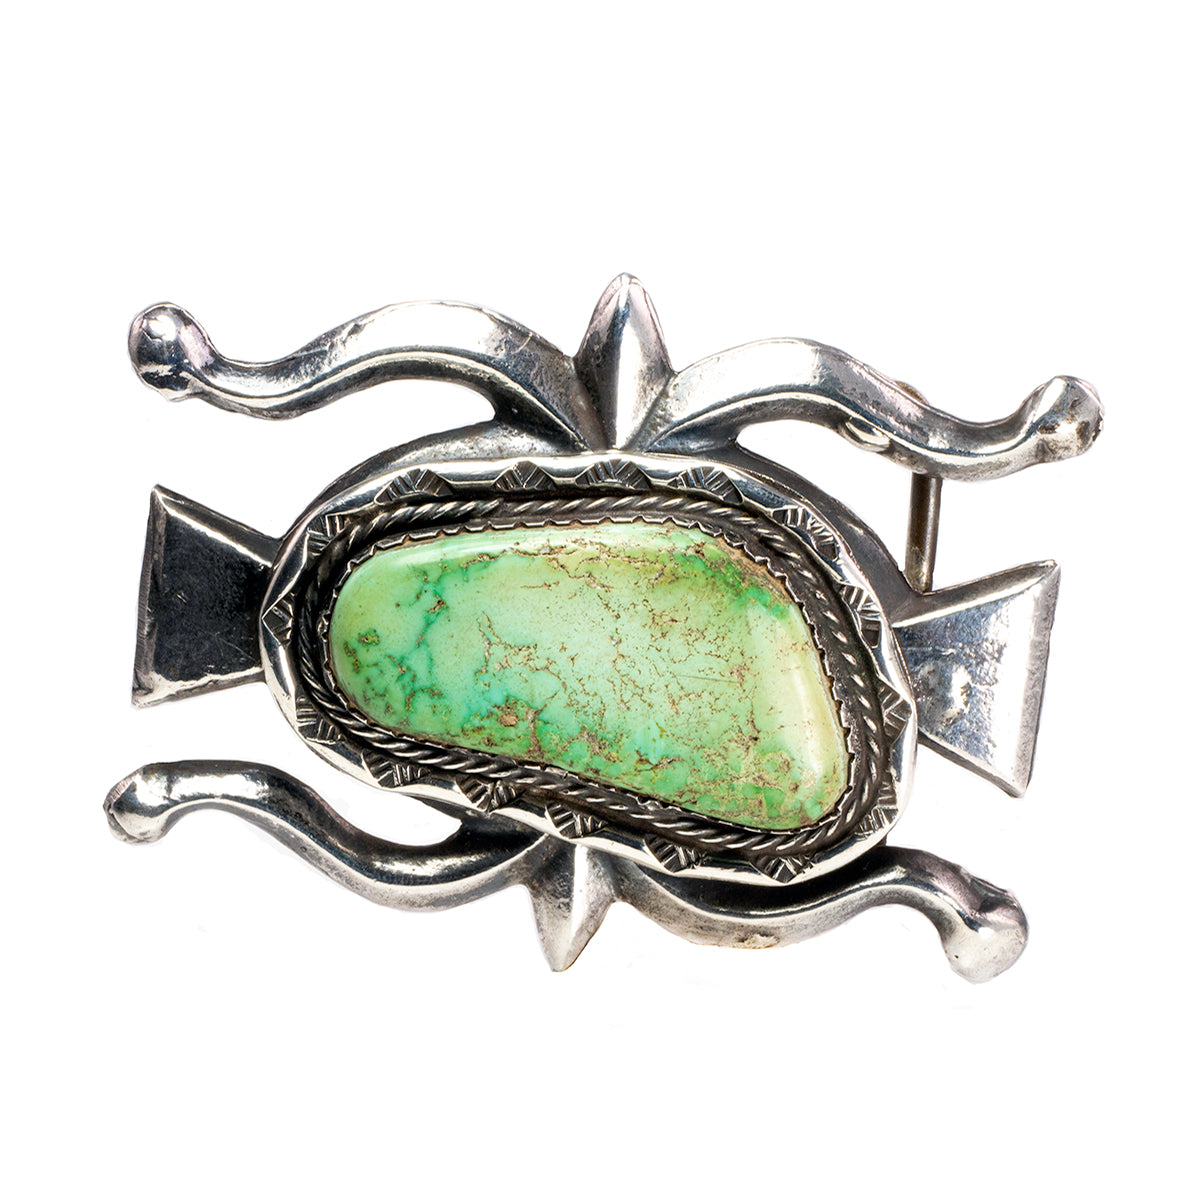 Native American Silver and Green Turquoise Belt Buckle